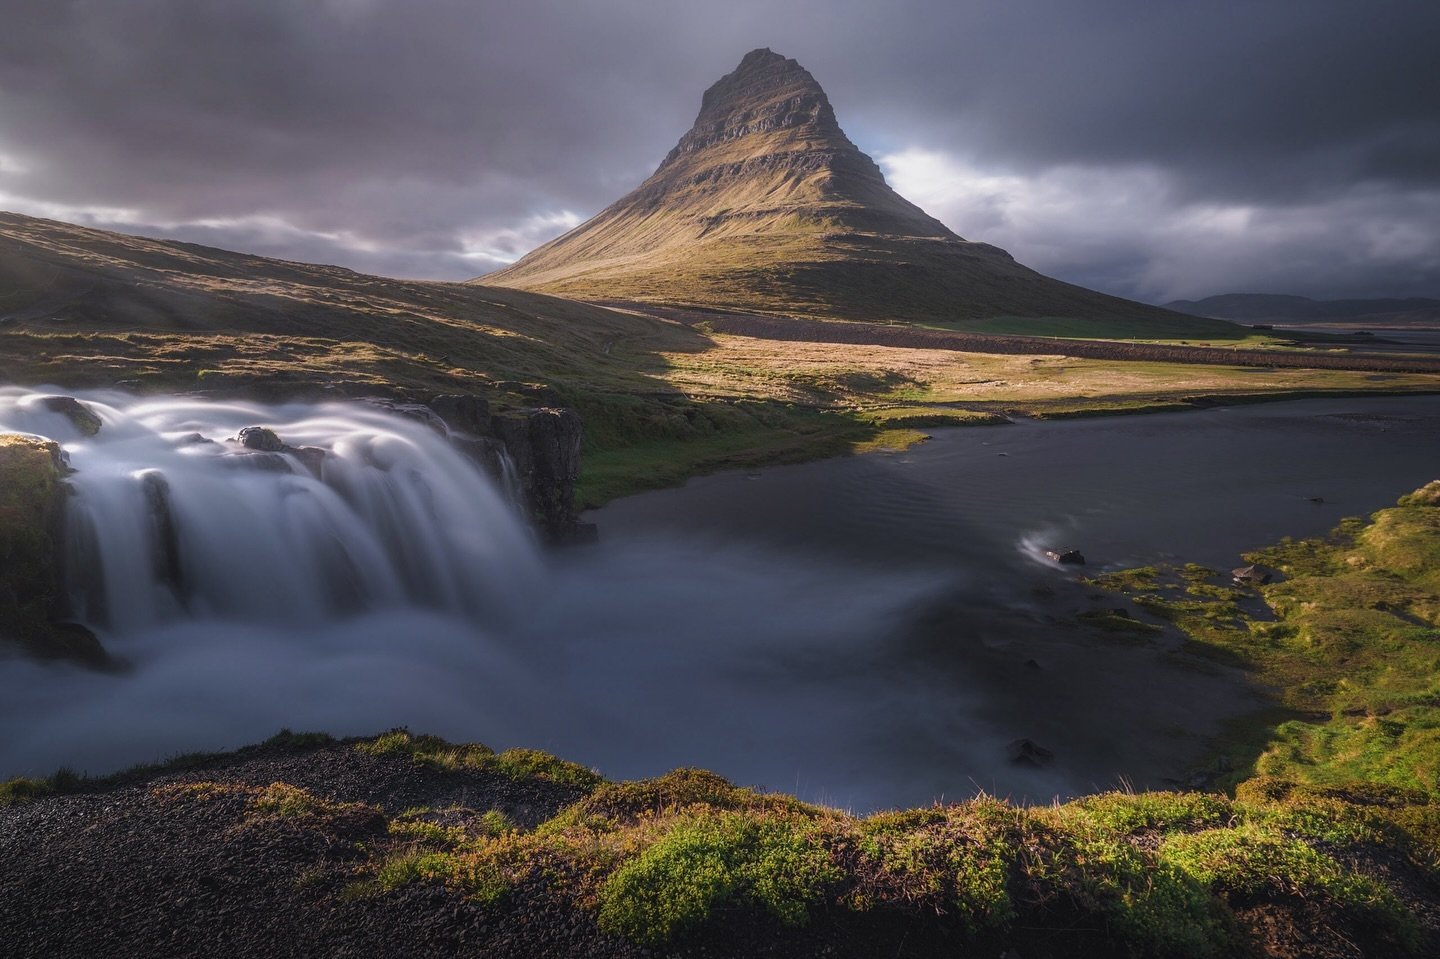 From the archives&hellip; 

Kirkjufellsfoss after an a day of heavy rains during the midnight sun. June, 2021, although it feels like yesterday&hellip;

I&rsquo;m off in the desert right now&hellip; meeting up with @josephjamescole to see some stars 